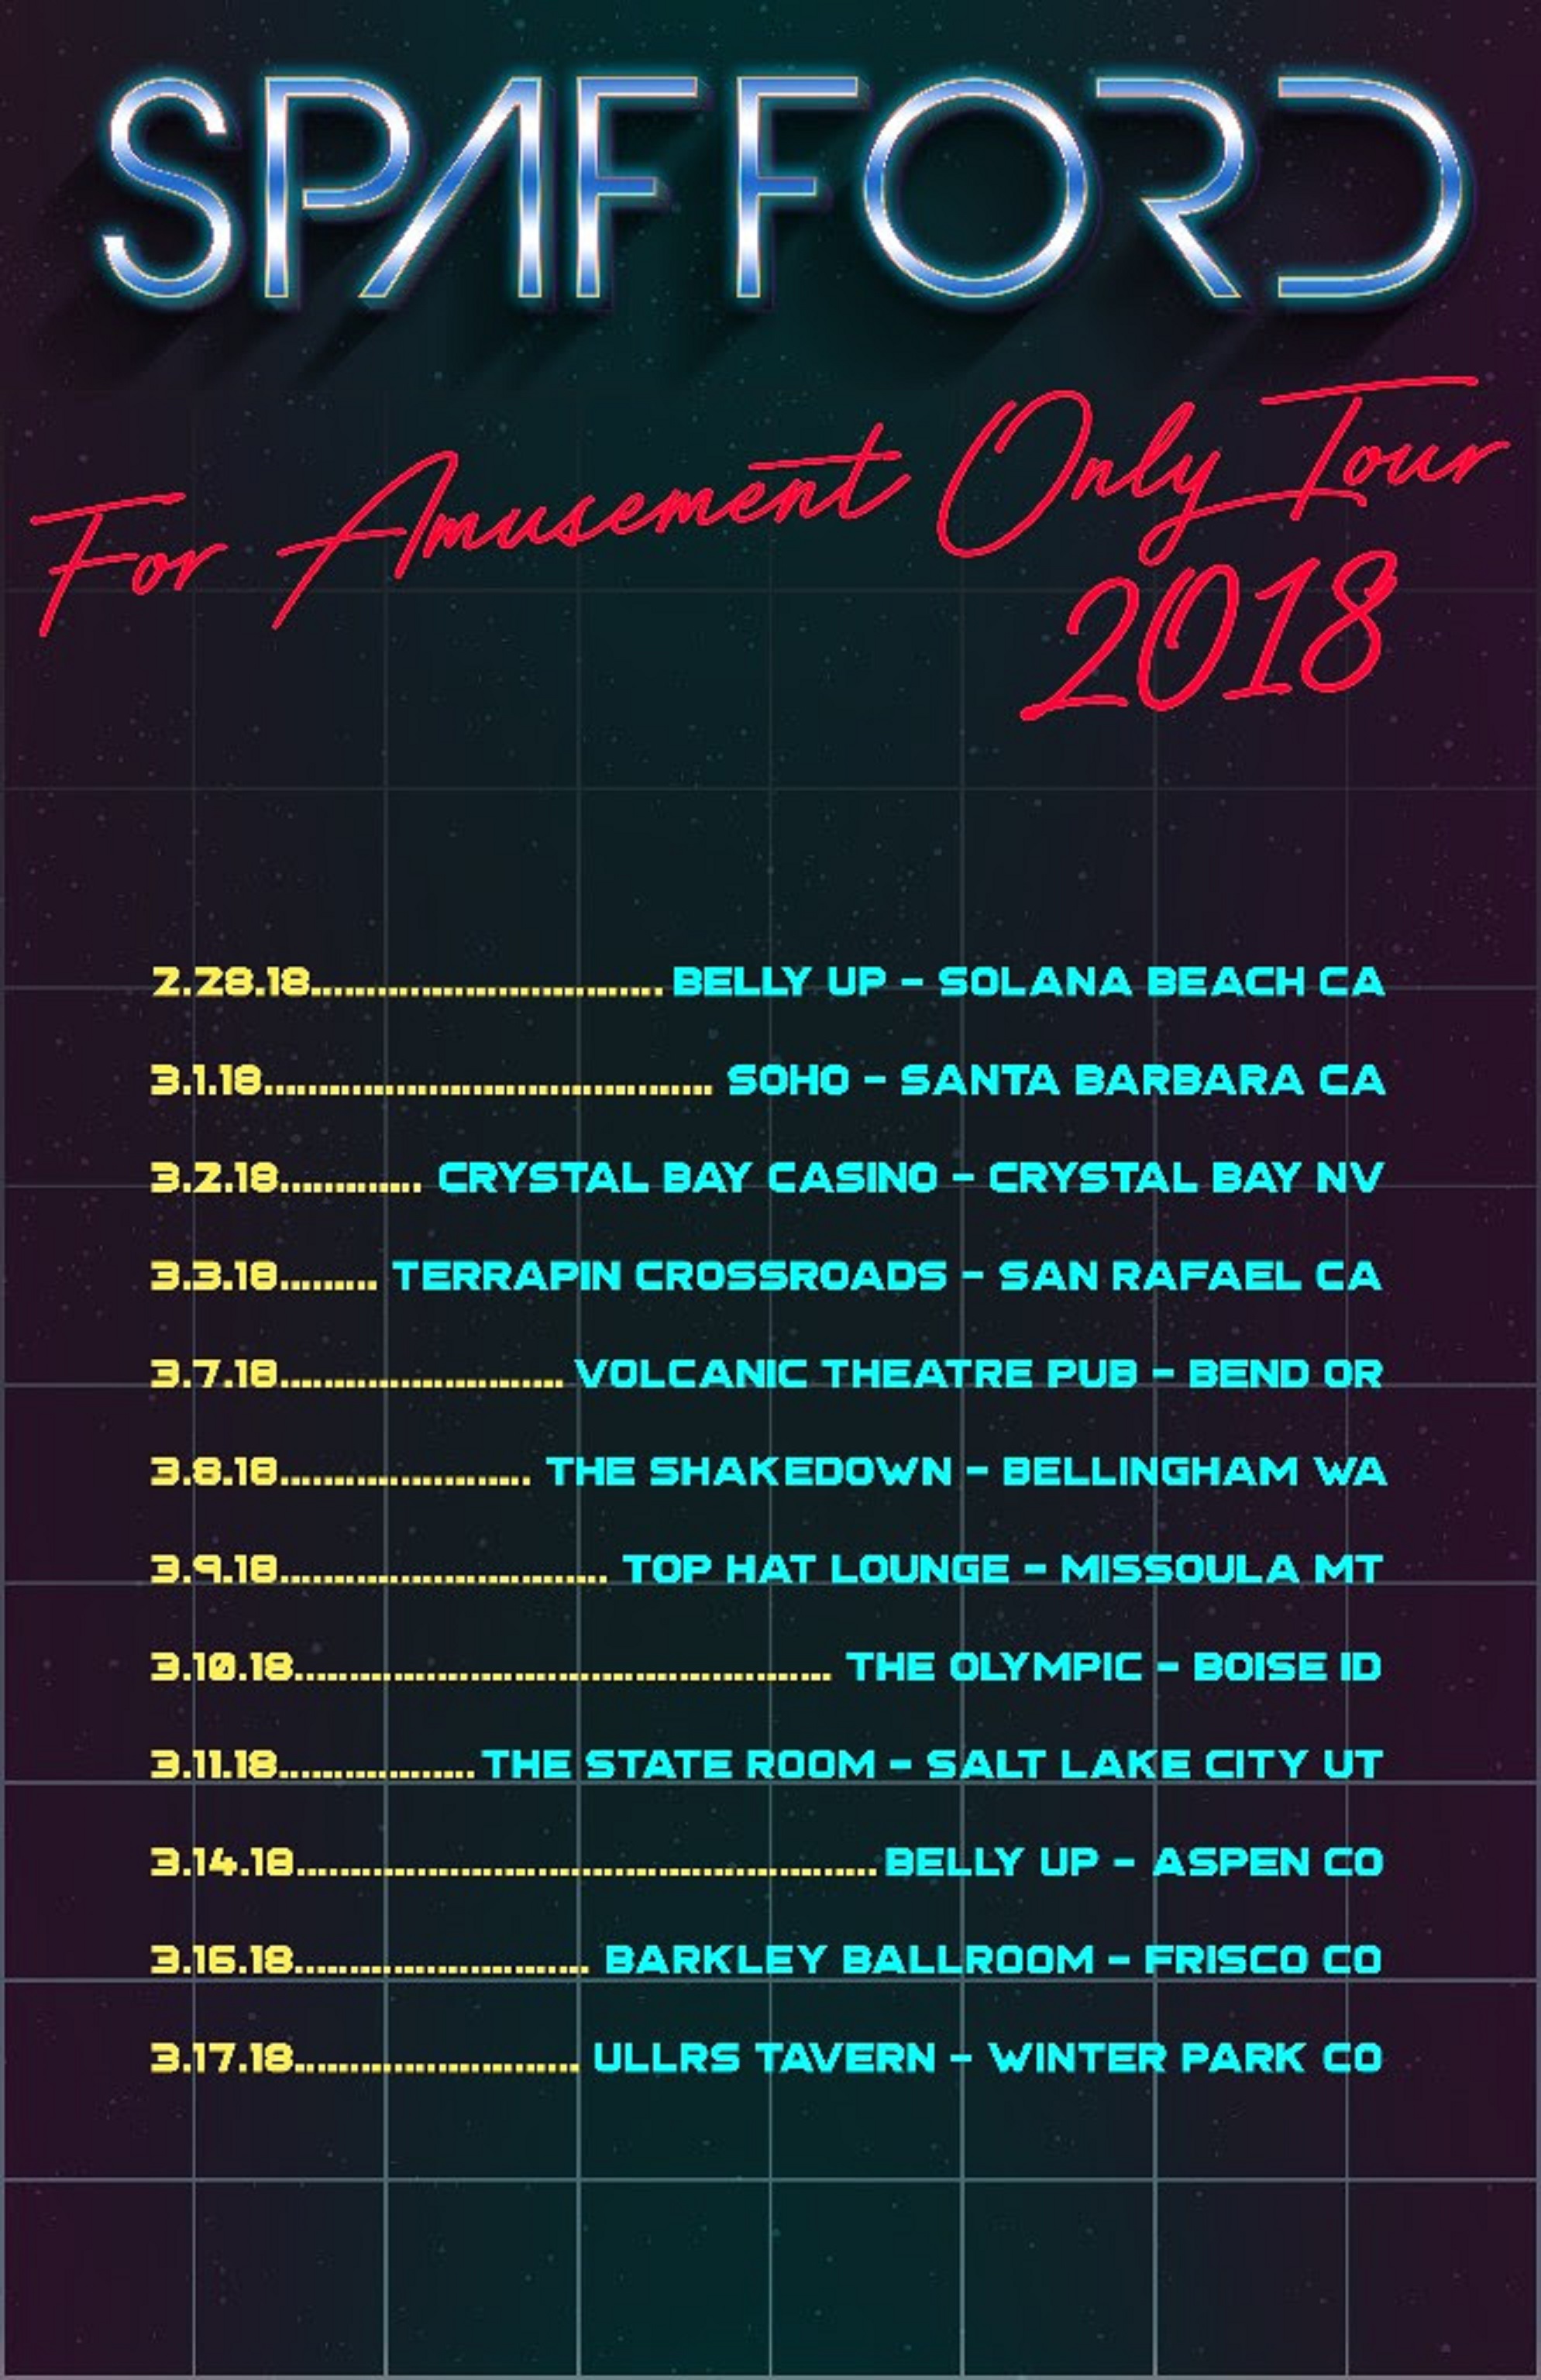 Spafford Adds Additional Dates To 'For Amusement Only' Winter 2018 Tour